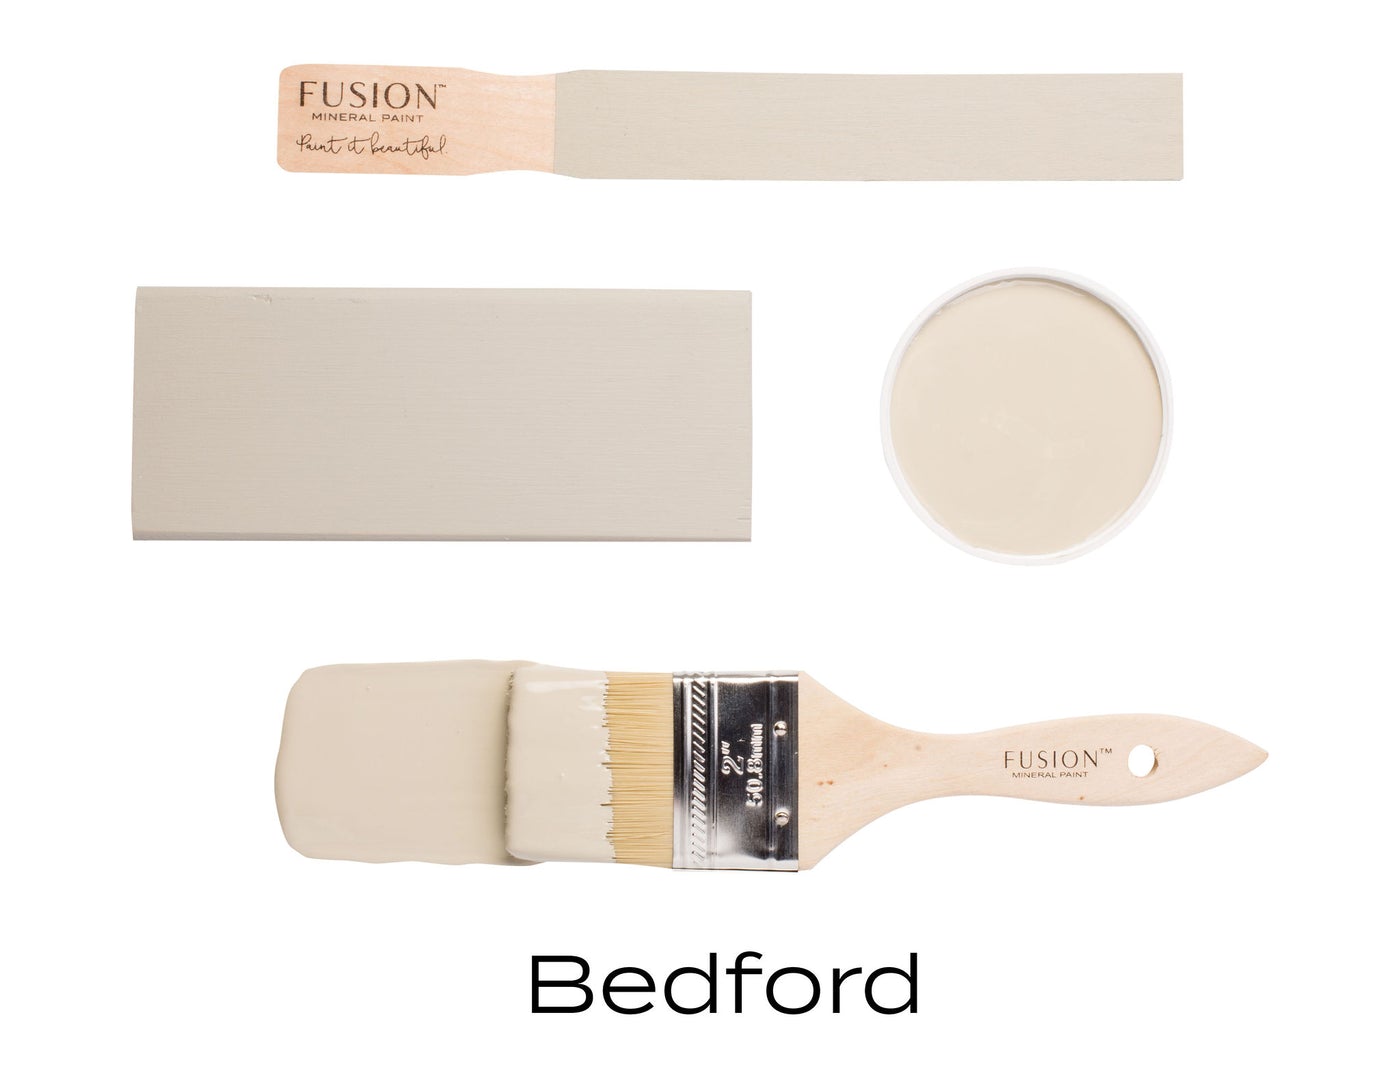 BEDFORD - FUSION MINERAL PAINT